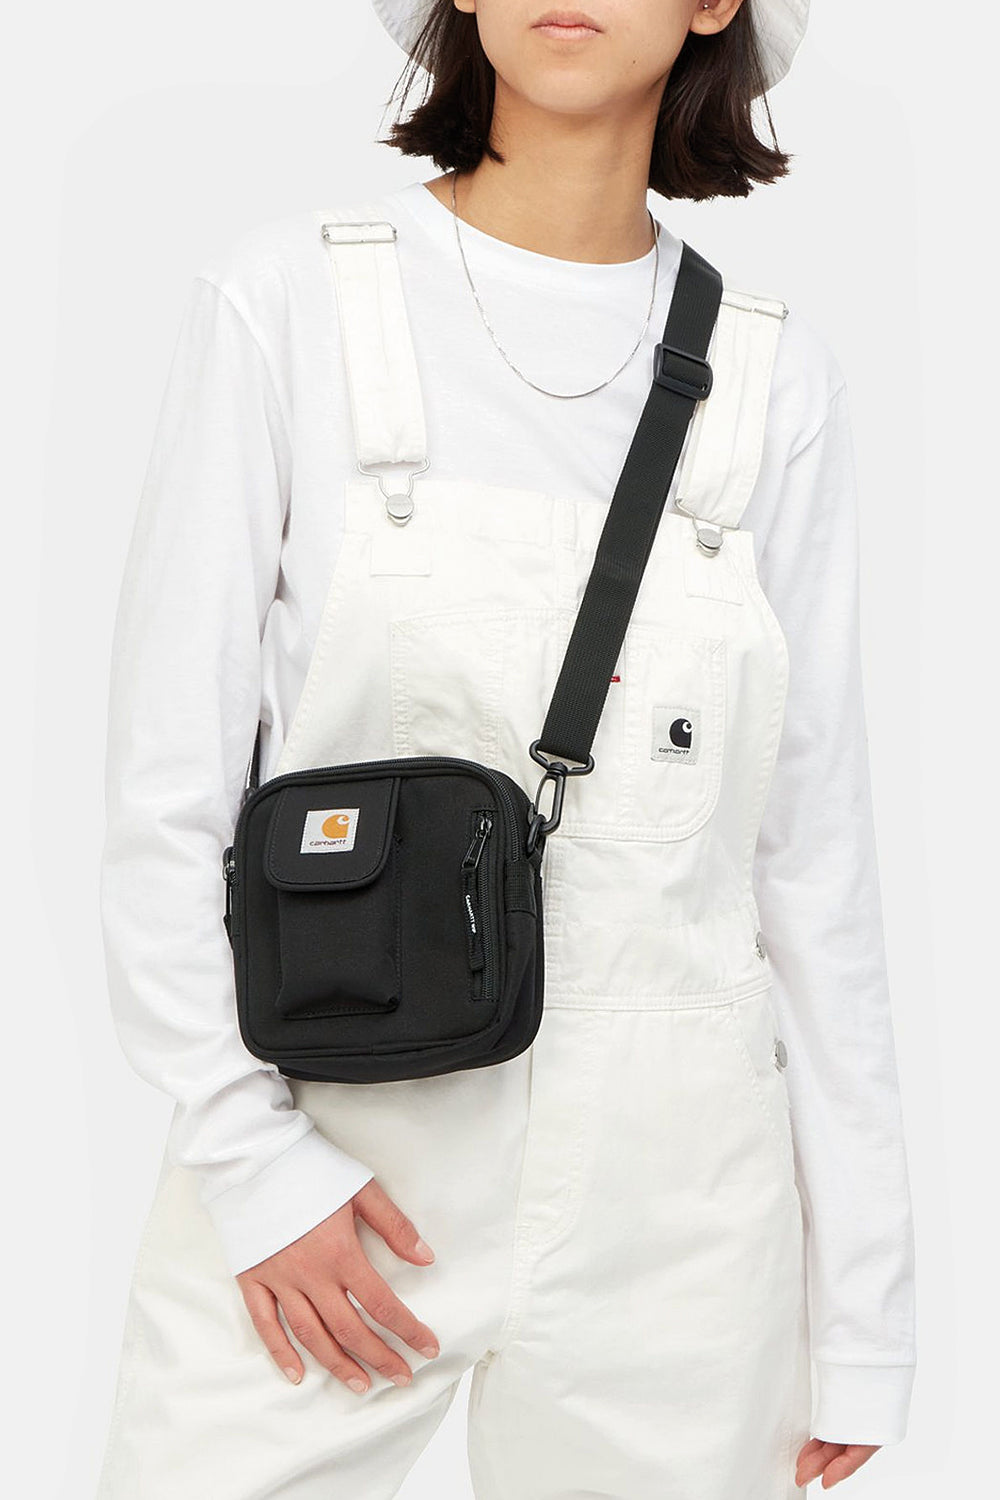 Carhartt WIP Small Essentials Recycled Side Bag (Black)